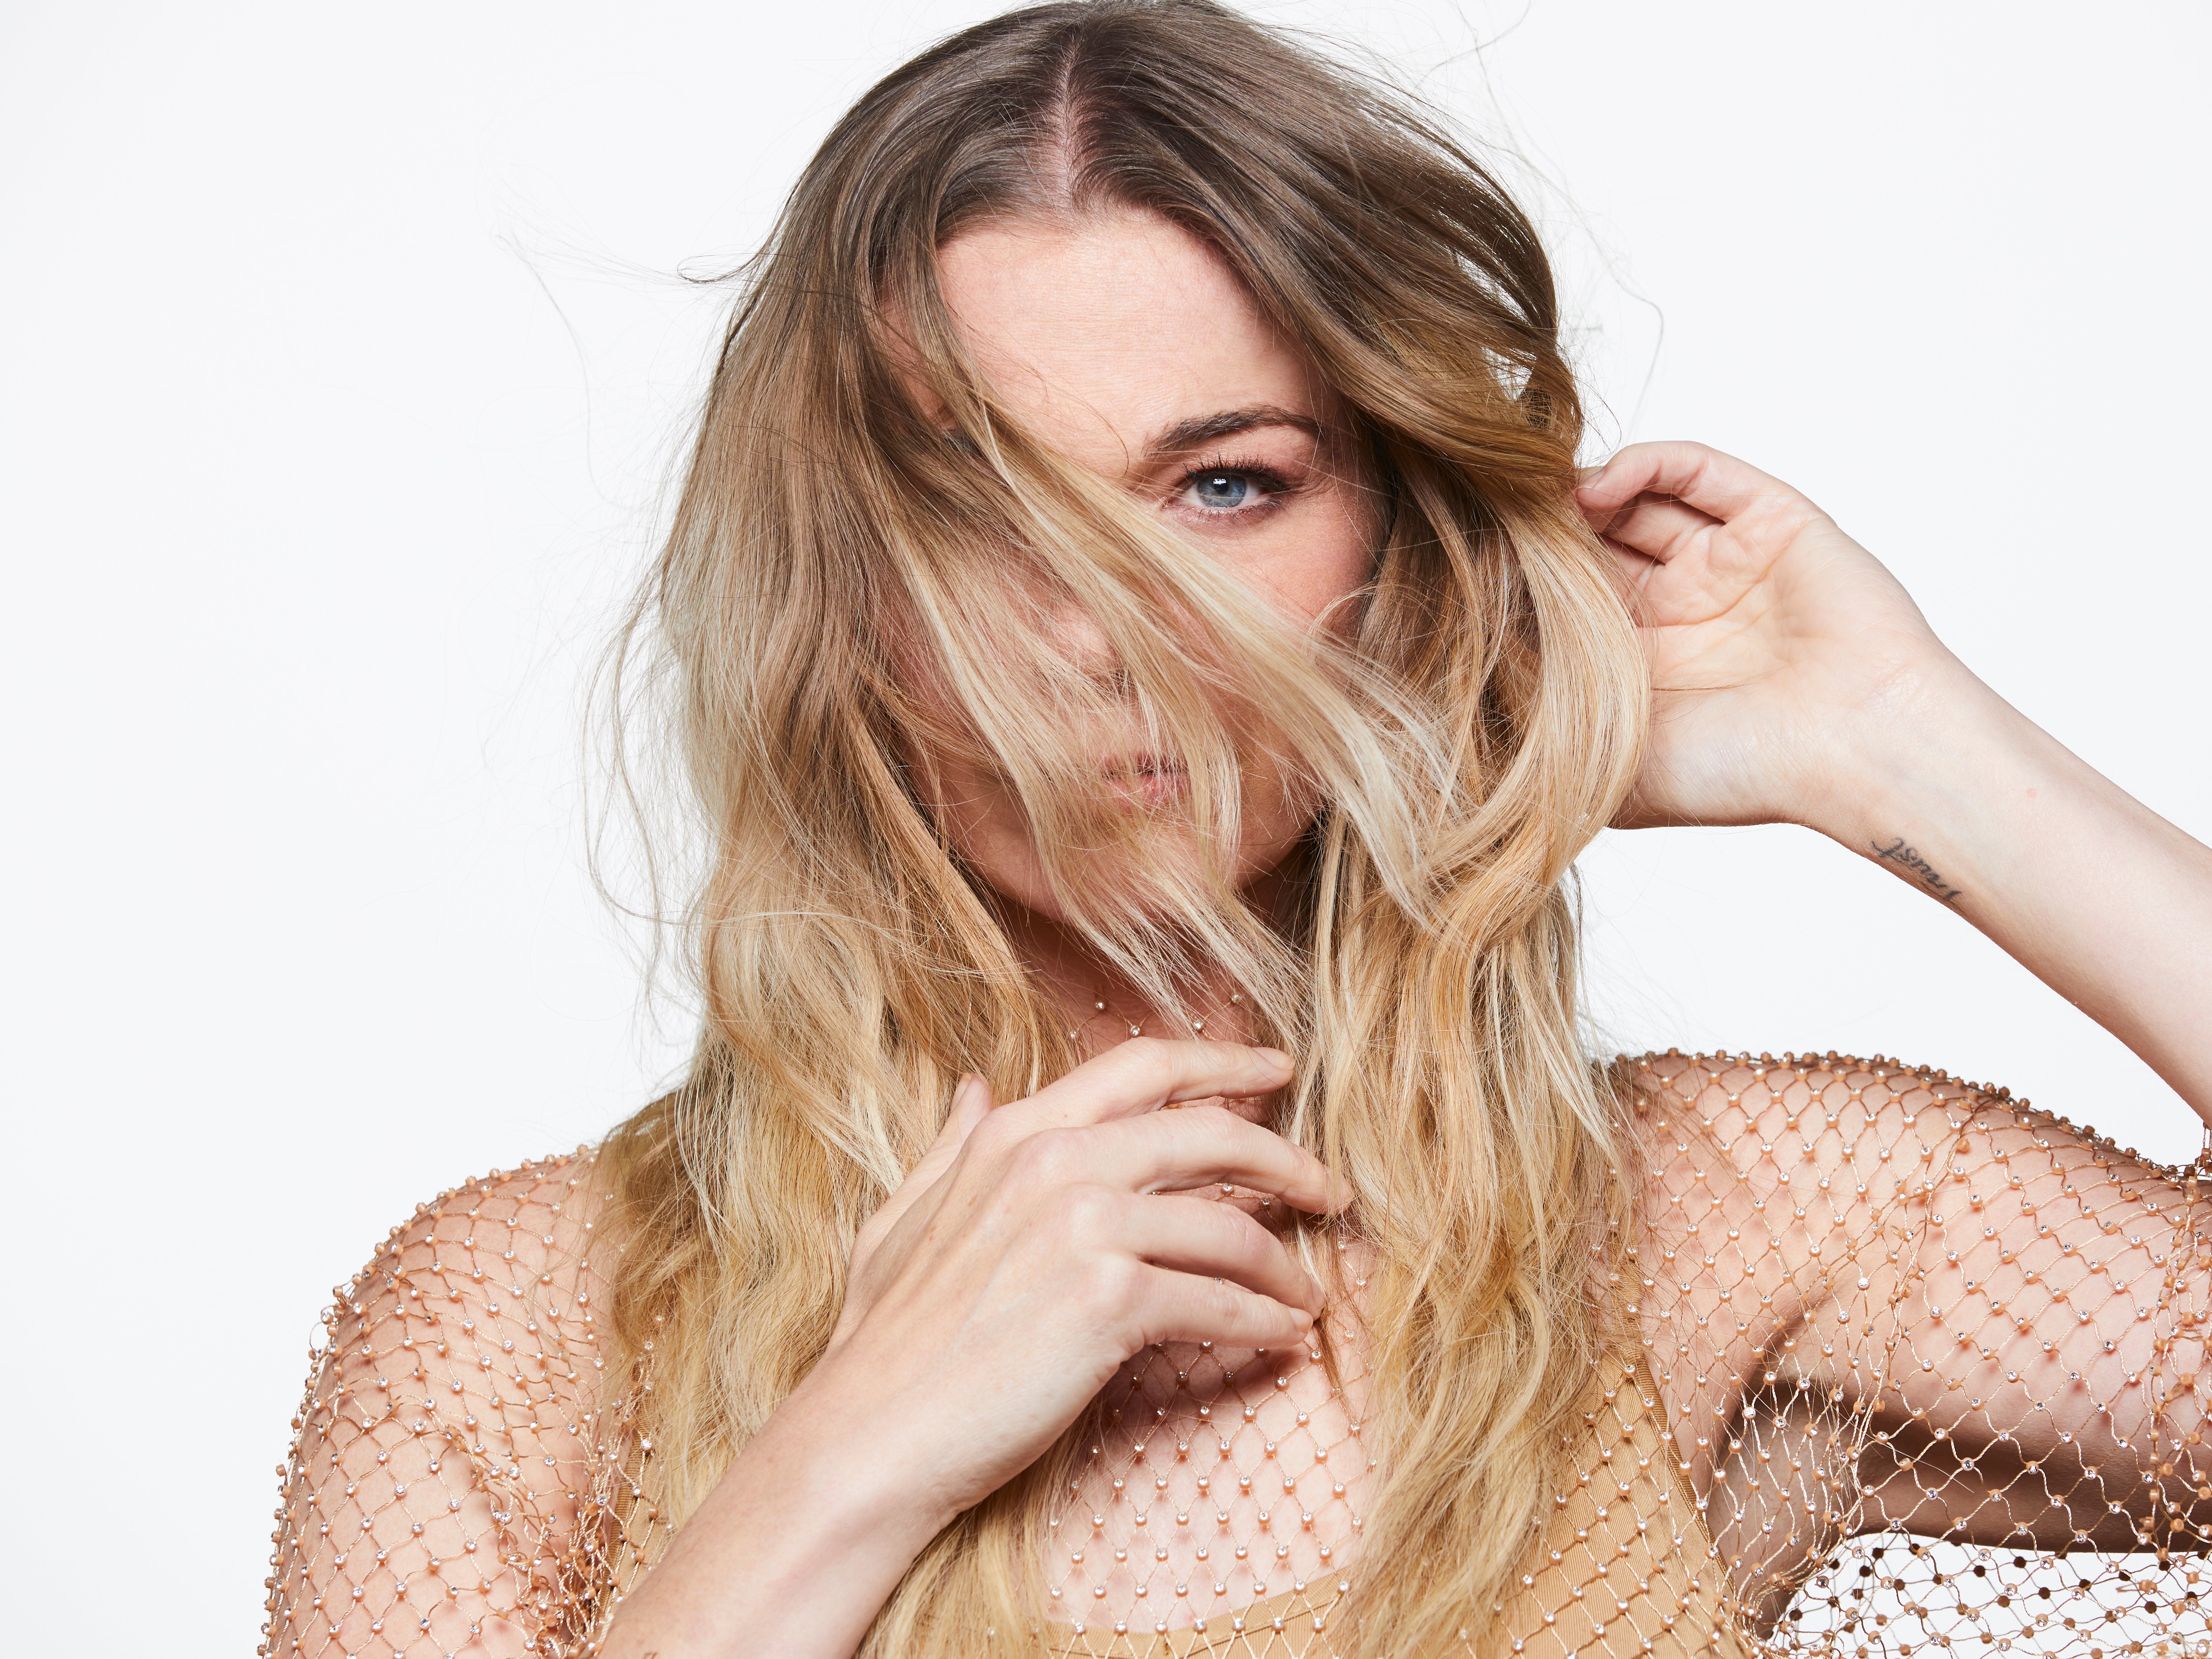 LeAnn Rimes: ‘There’s so much that I want to share with people’